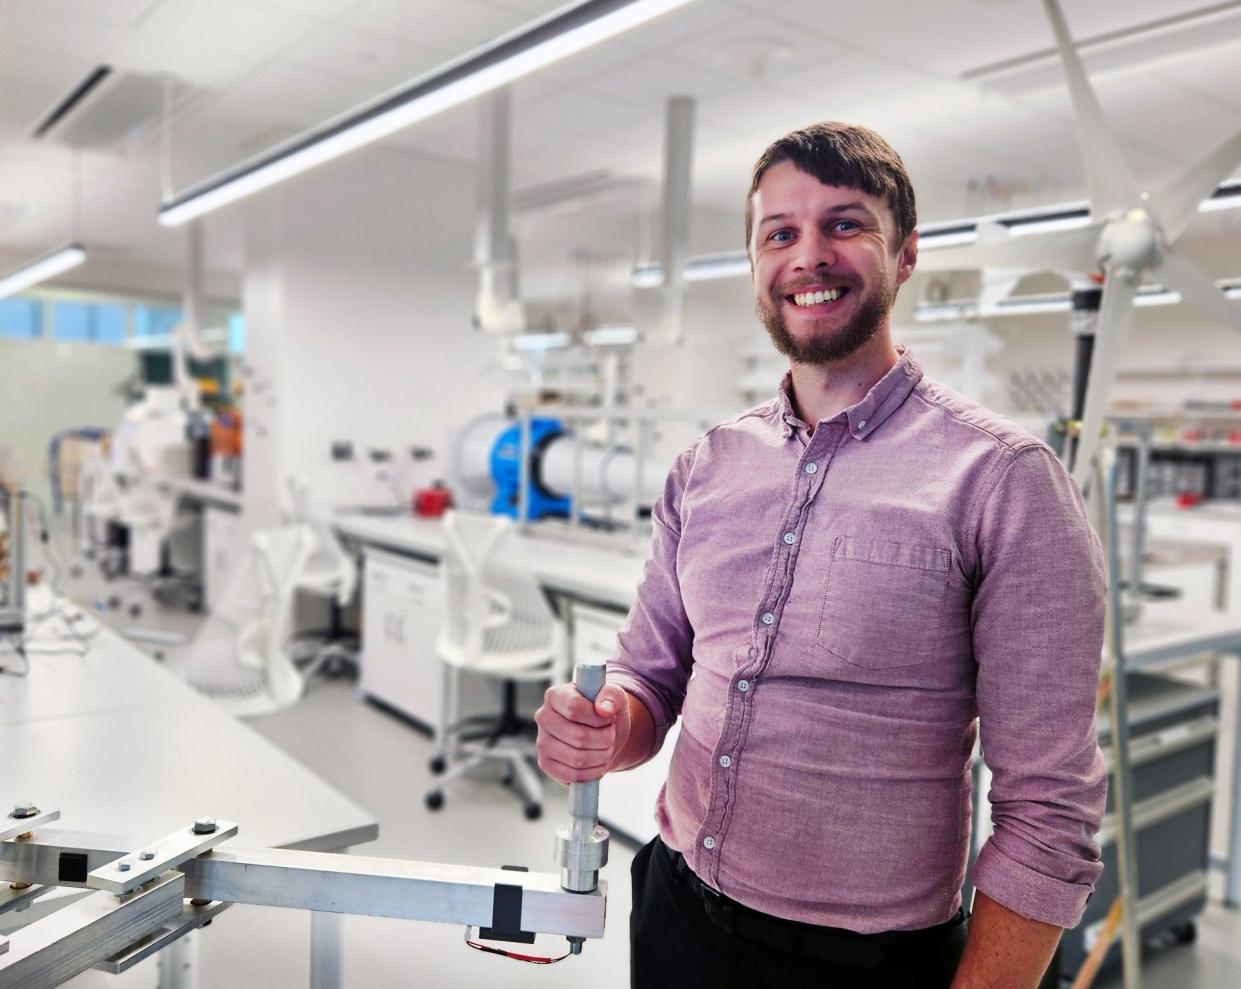 Chris Kelley, an assistant professor at Florida Polytechnic University, has received a $200,000 National Science Foundation Grant for research on Parkinson’s disease.